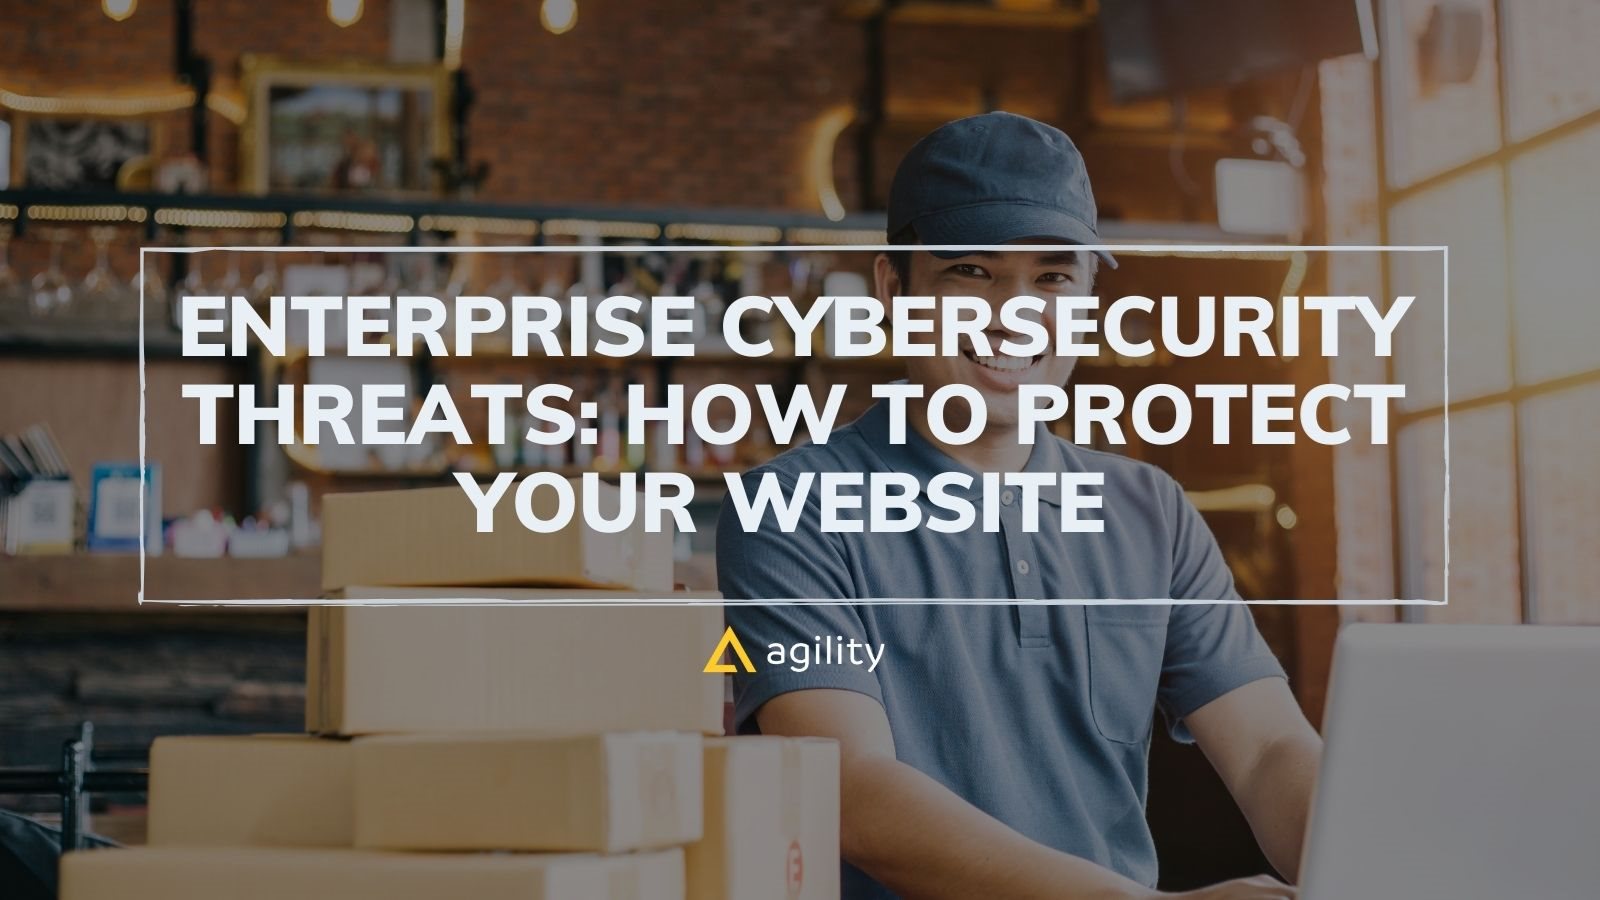 Enterprise cybersecurity threats: how to protect your website 